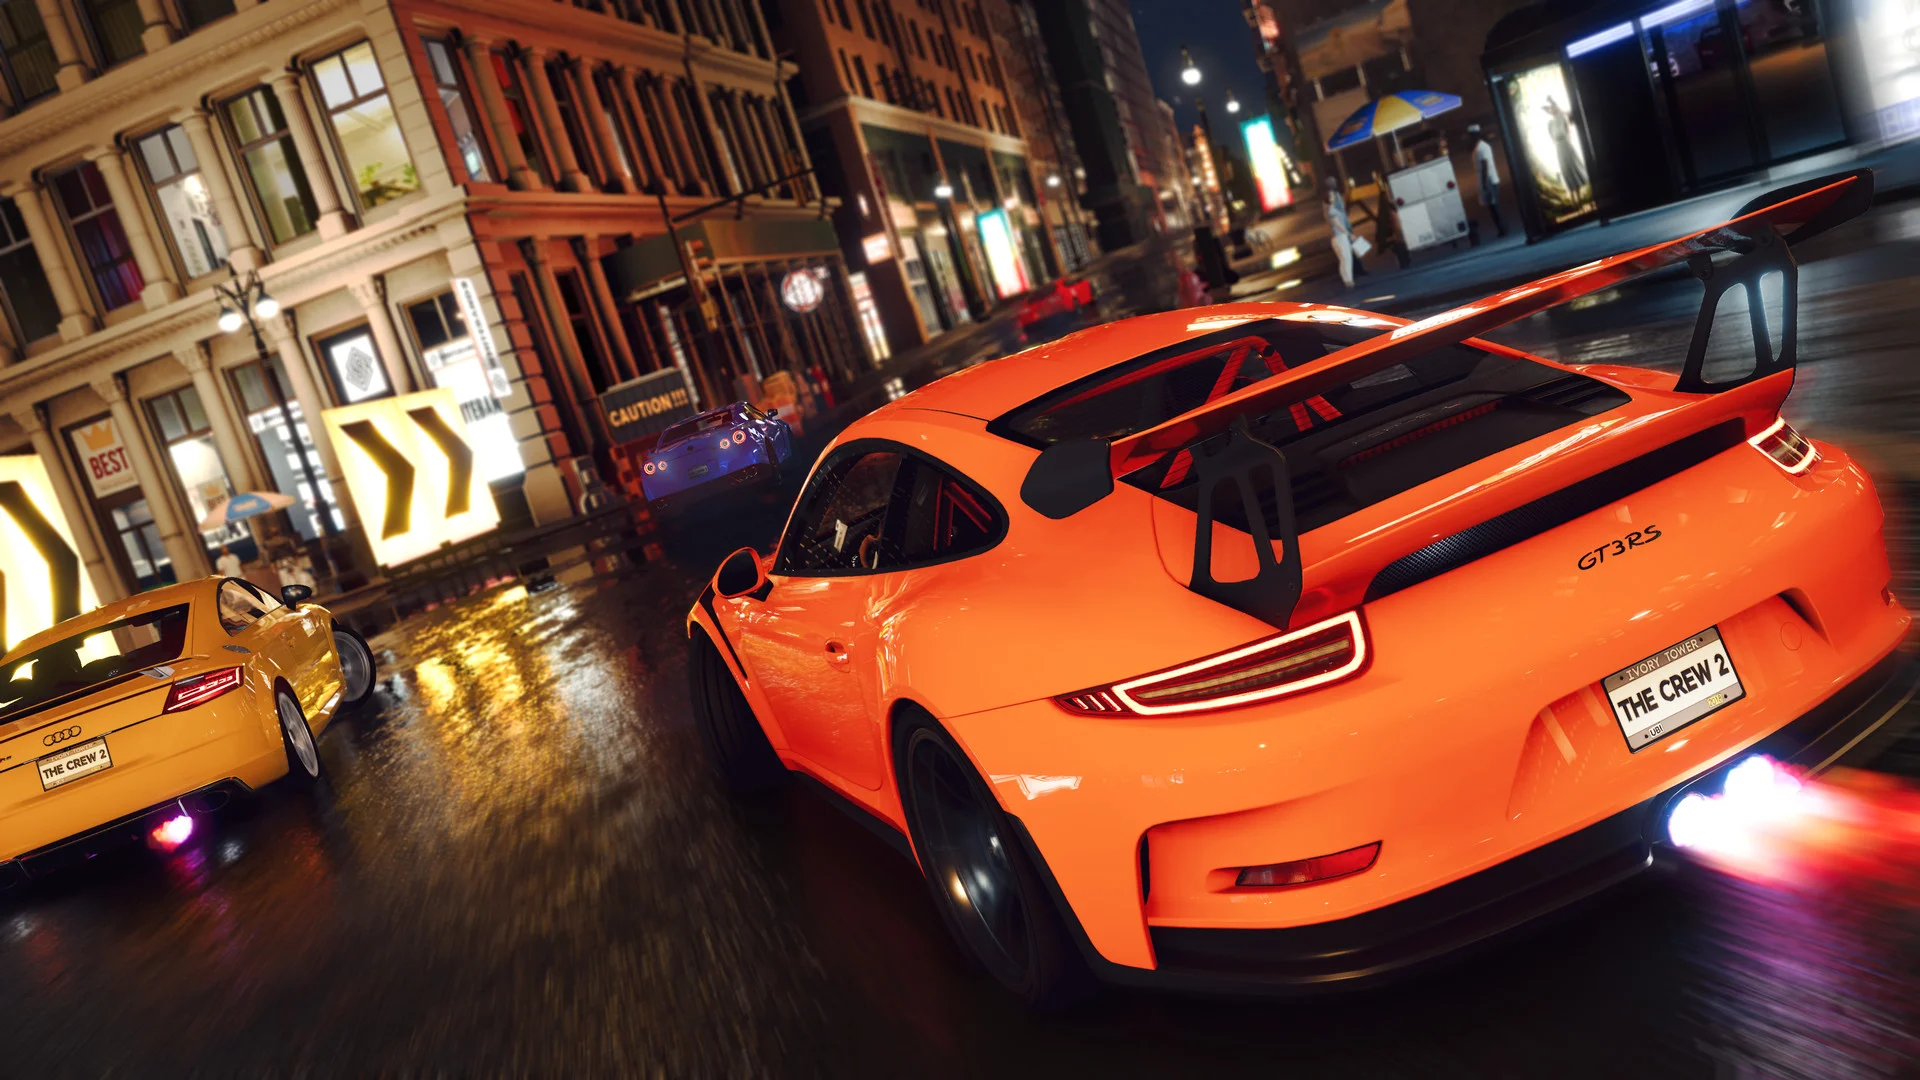 The Crew 3 Will Be Called Motorfest, Datamined Information Confirms